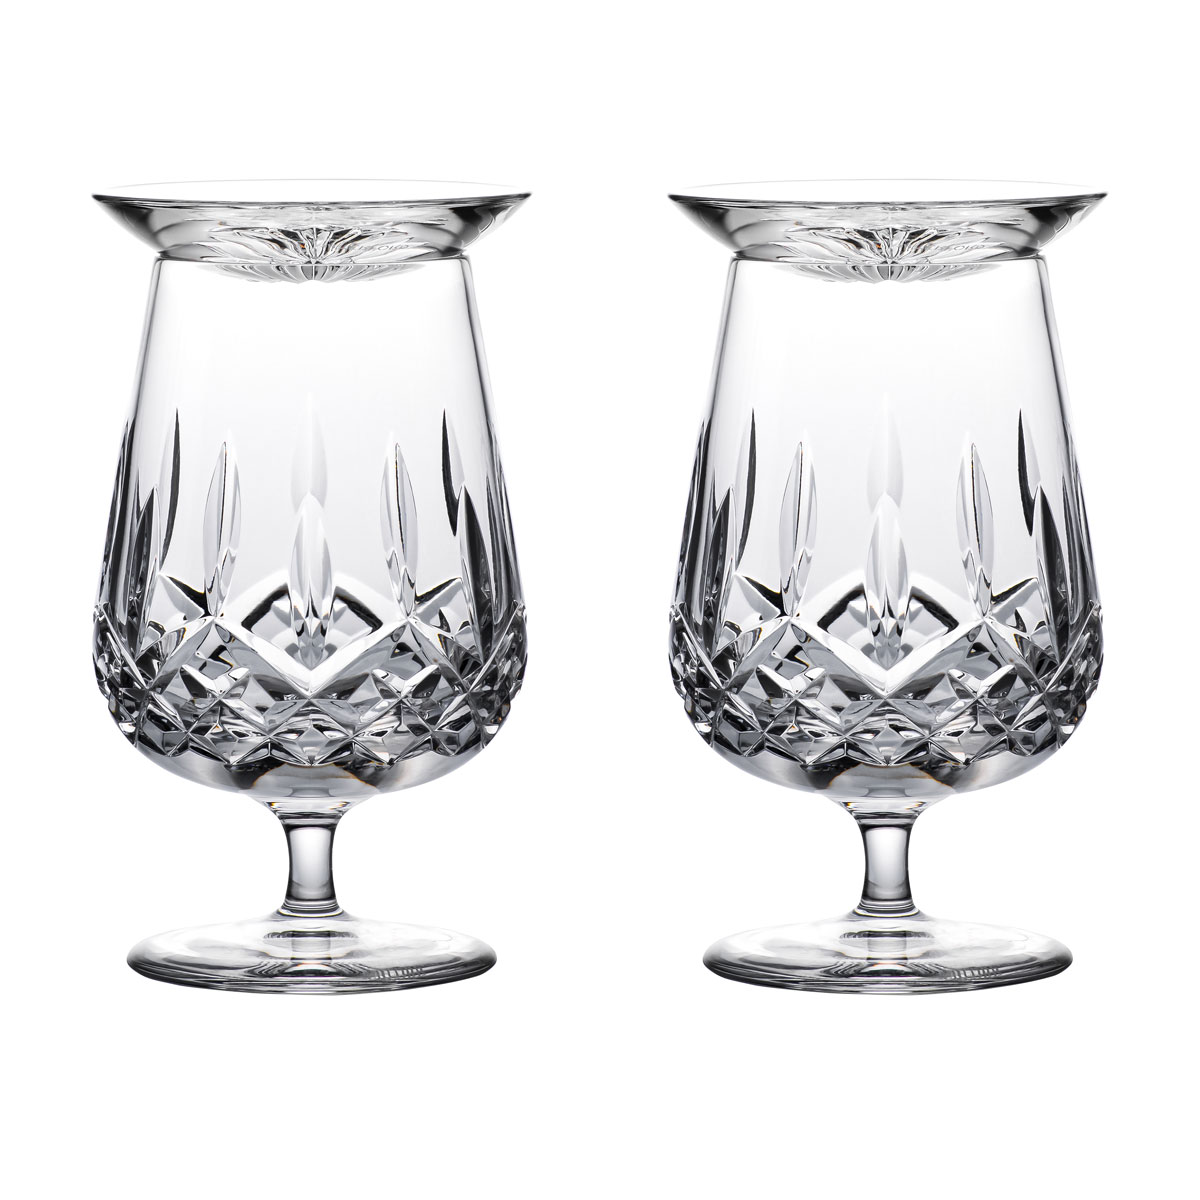 Waterford Crystal Connoisseur Lismore Rum Snifters and Tasting Cap, Pair